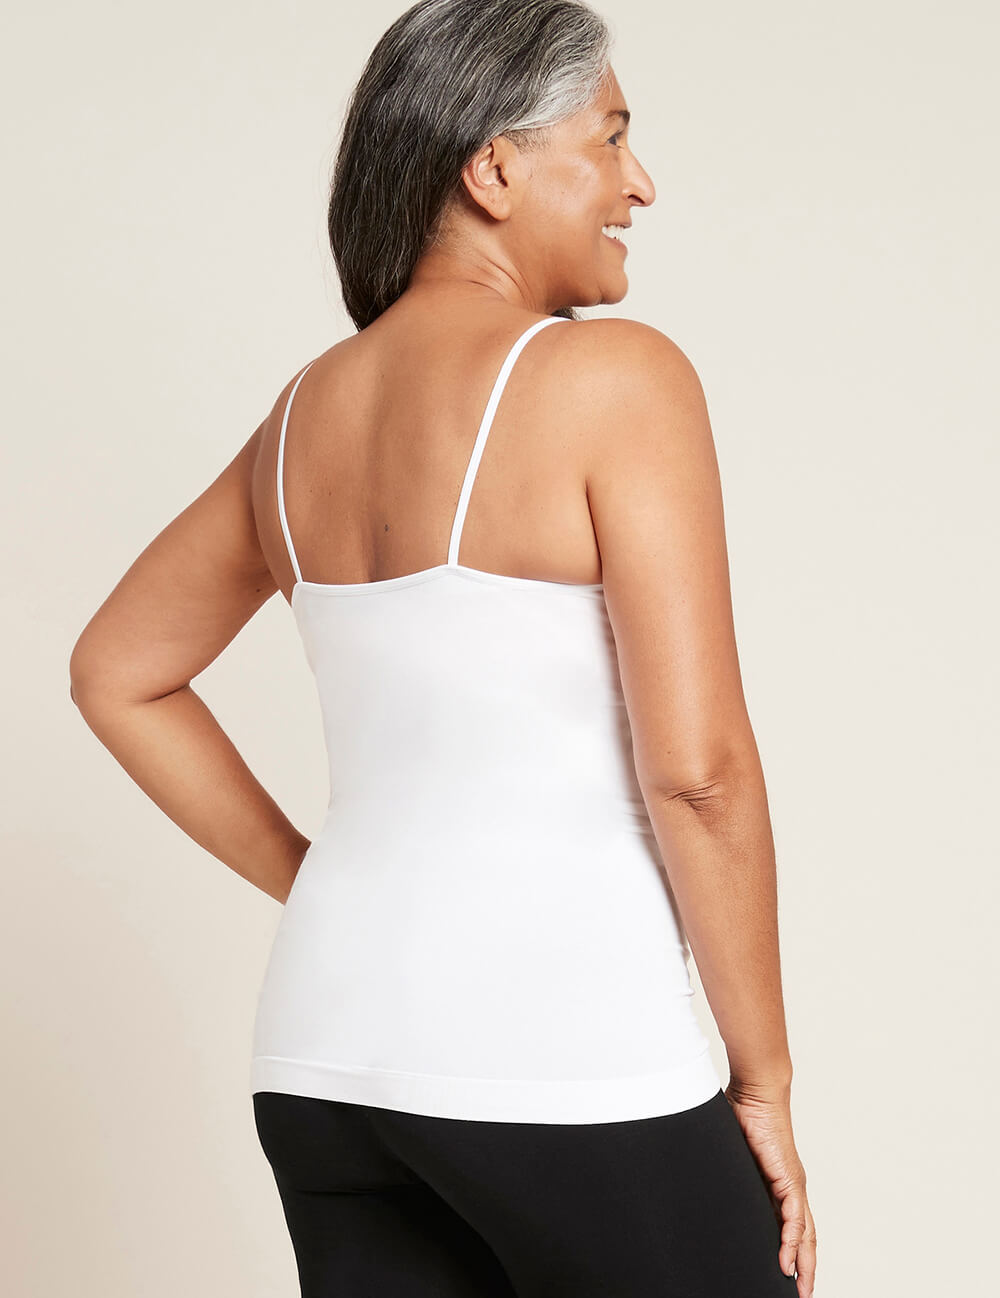 Boody Bamboo Womens Cami Camisole Tank Top Shirt in White Rear View